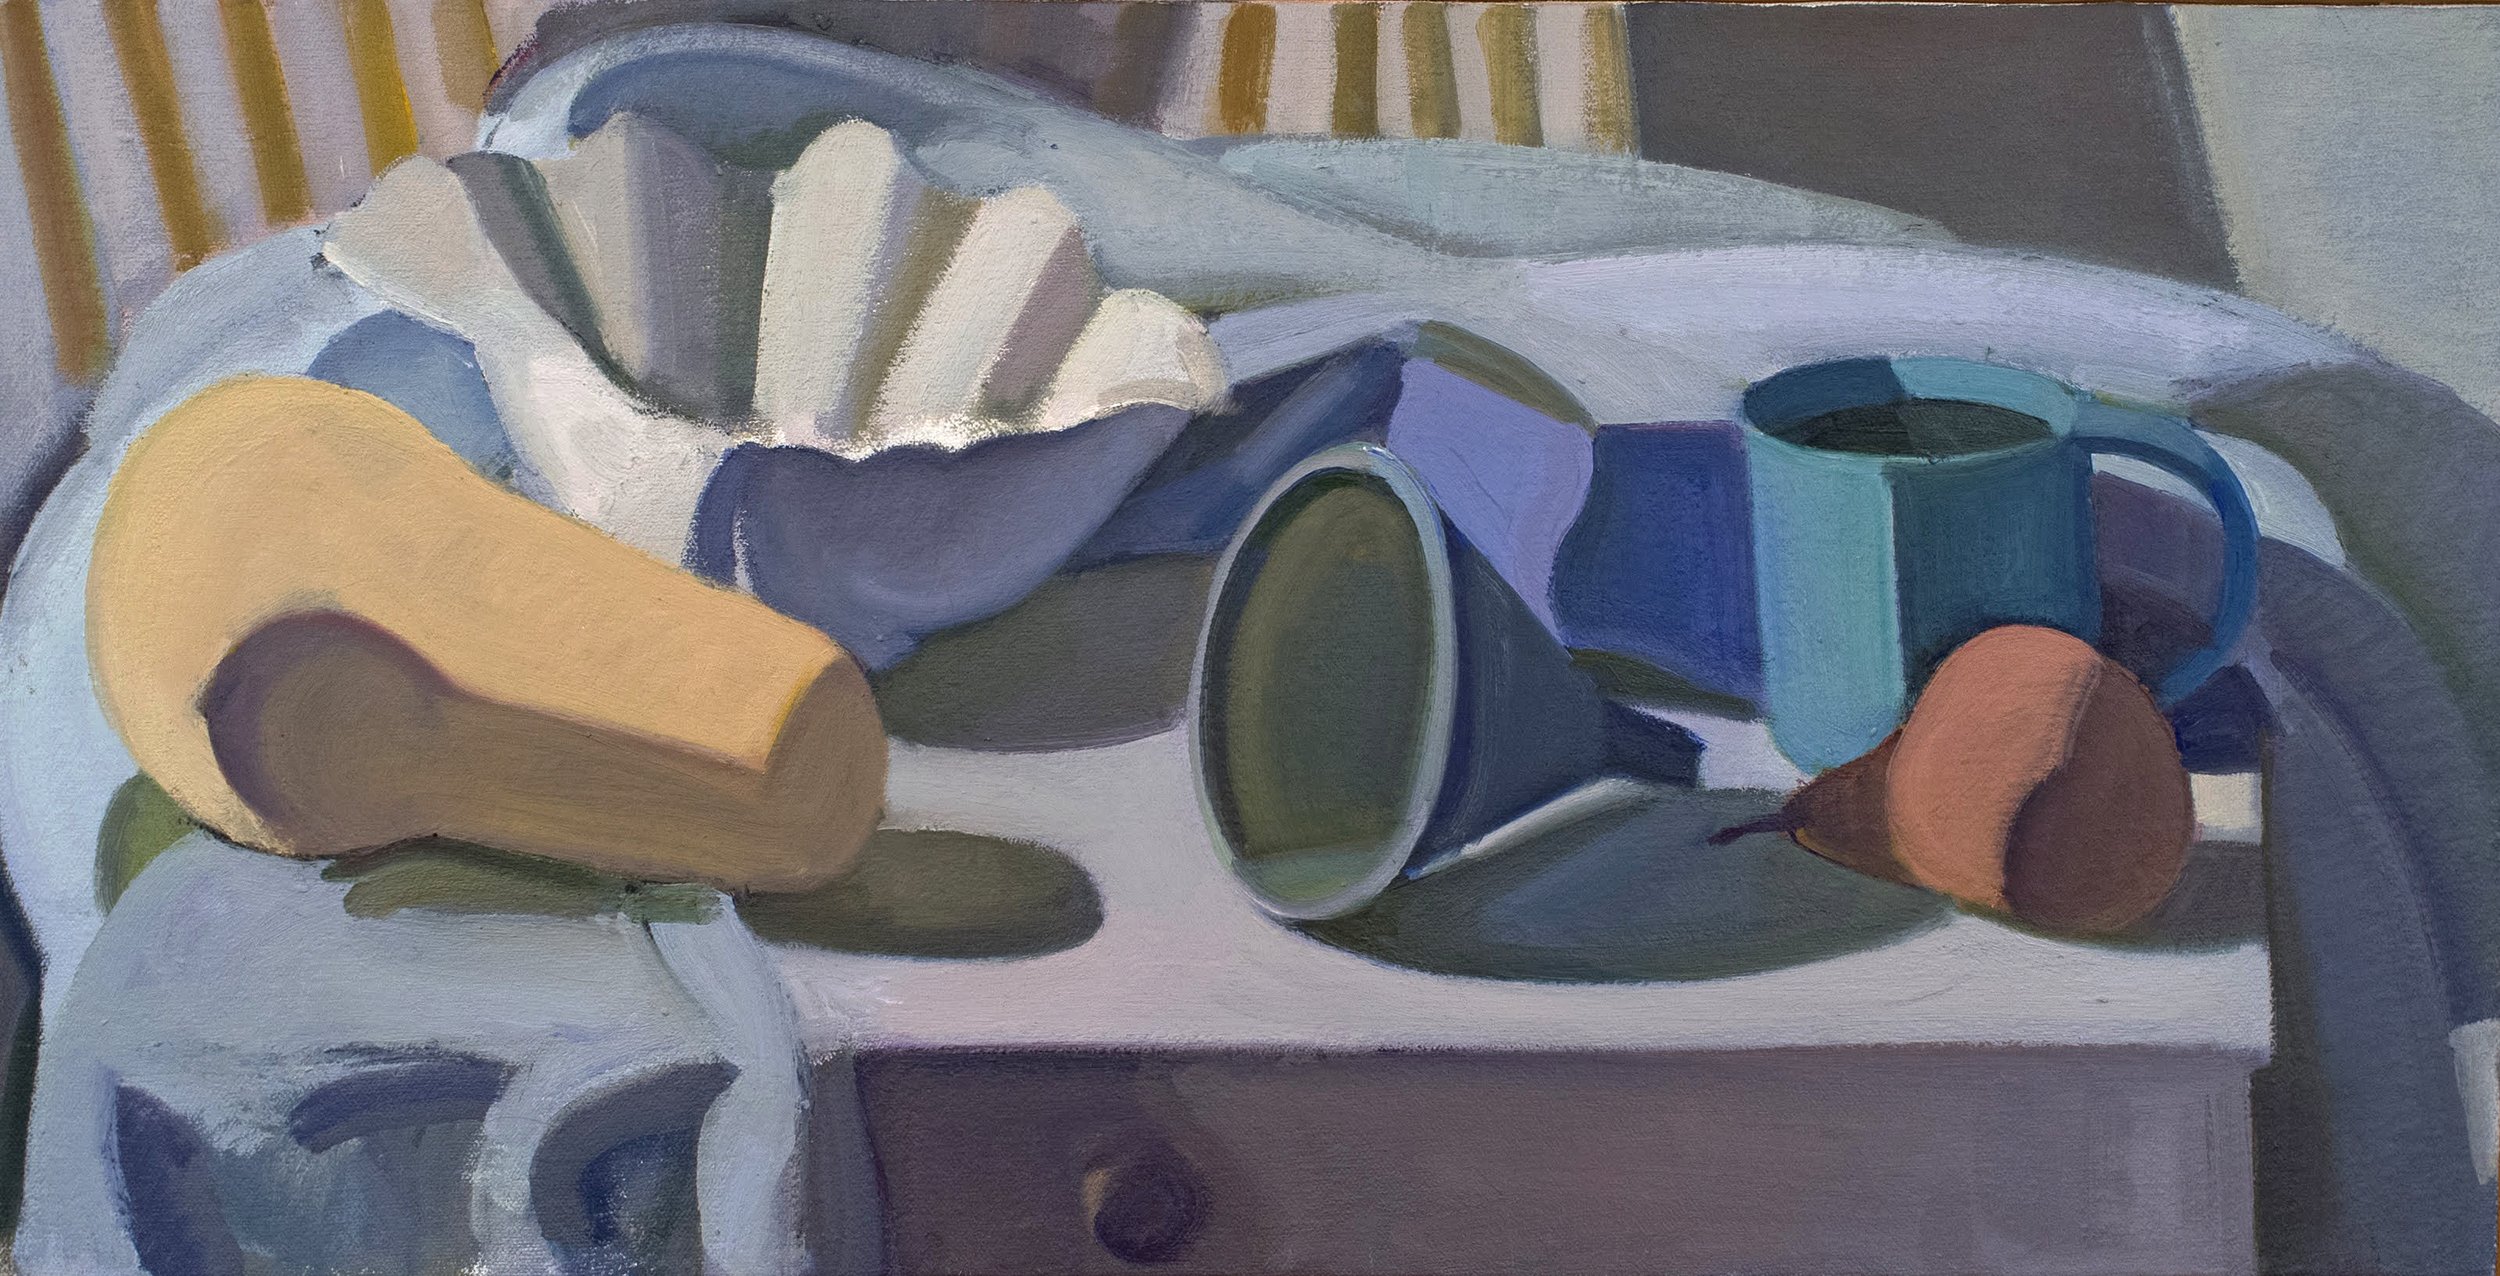   Shell, Funnel and Blue Cloth , 1997, oil/canvas, 12 x 24 in. (Private collection) 